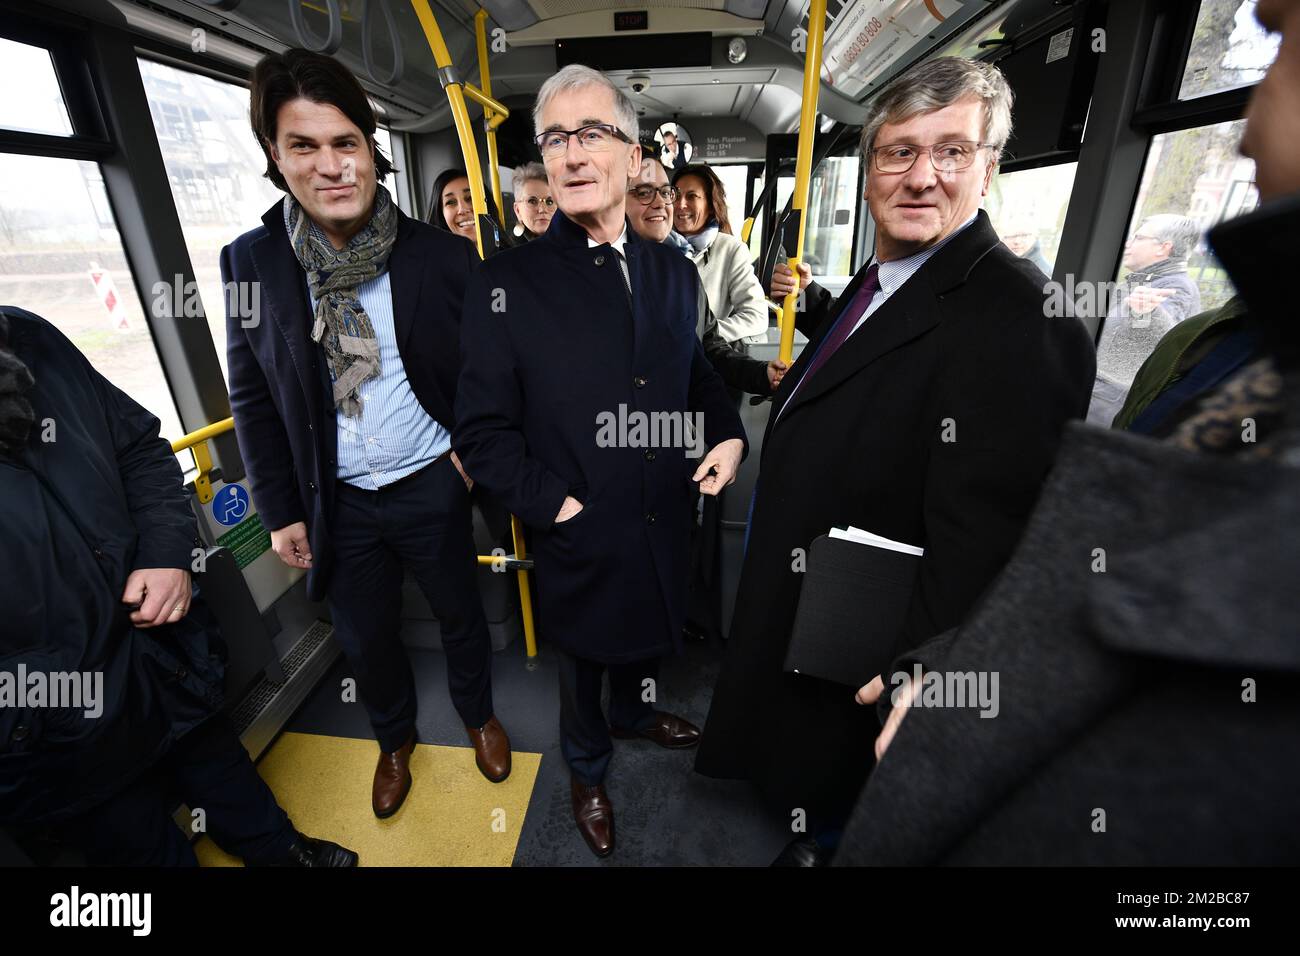 Limburg deputy Igor Philtjens, Flemish Minister-President Geert Bourgeois and LRM chairman Hugo Leroi pictured on the bus after a Minister's council of the Flemish Government, in Terhills Hotel in Maasmechelen, Friday 01 December 2017. BELGA PHOTO YORICK JANSENS Stock Photo